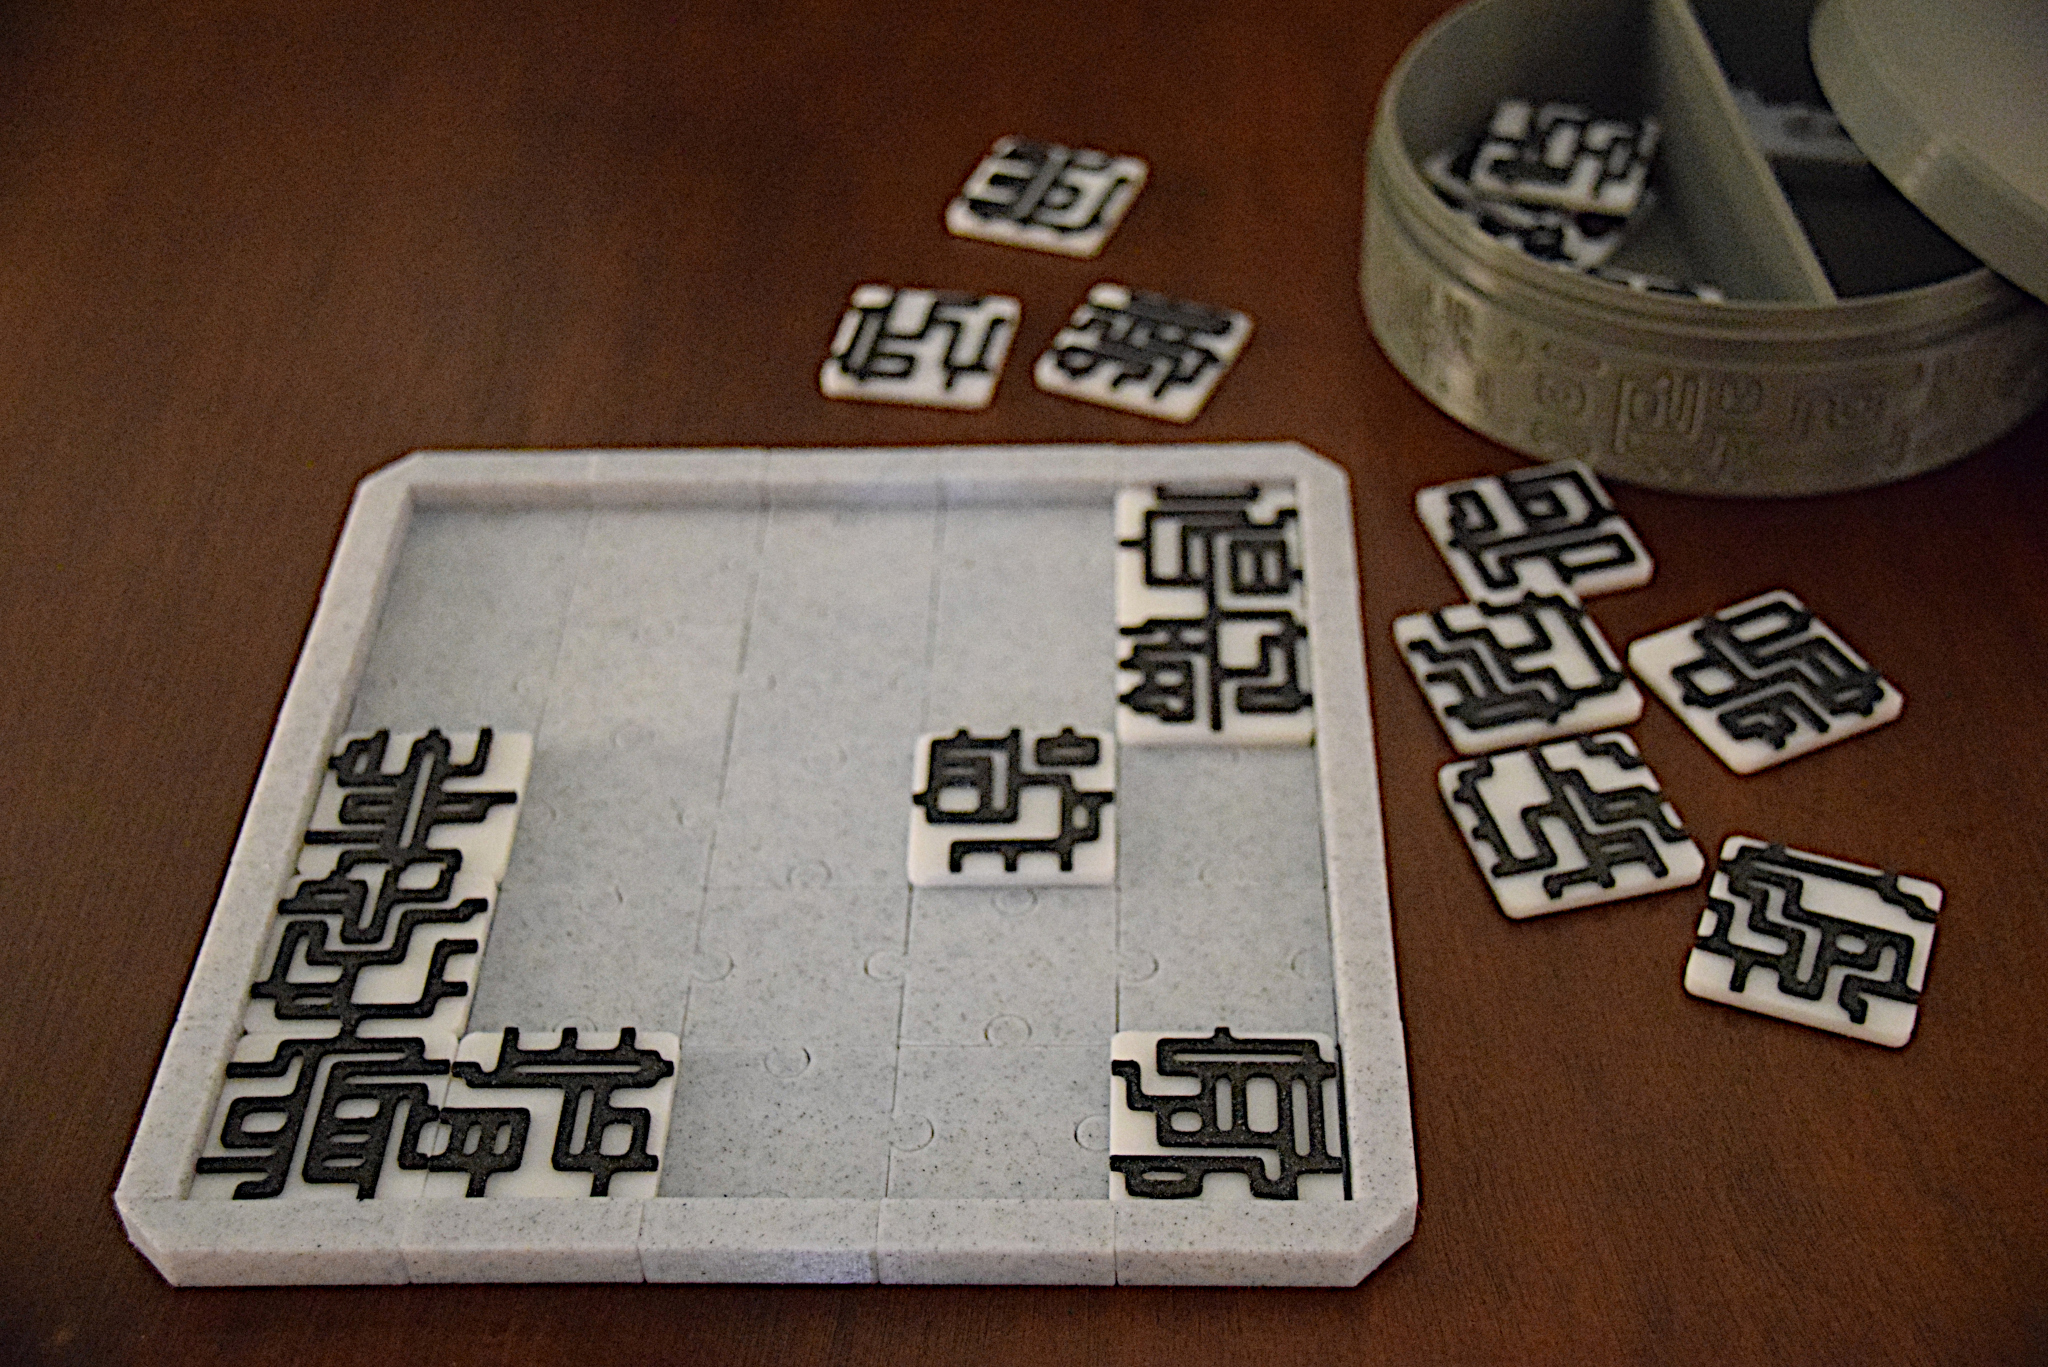 Garden of Forking Paths (Tile placing board game / puzzle)